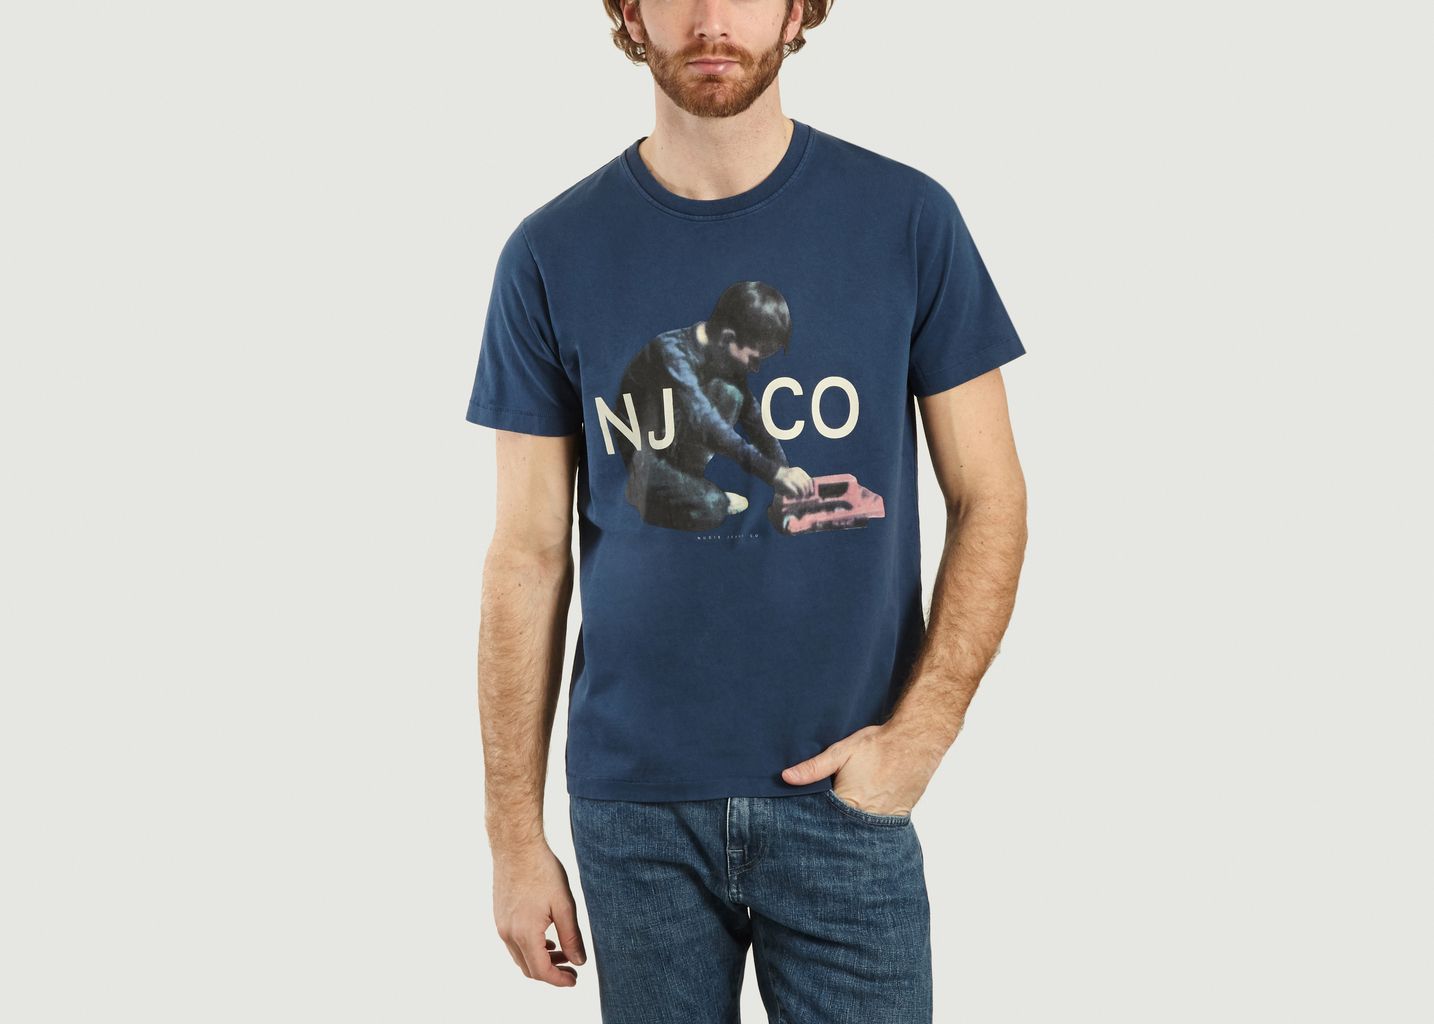 Organic Cotton Child Roy T-Shirt - Nudie Jeans